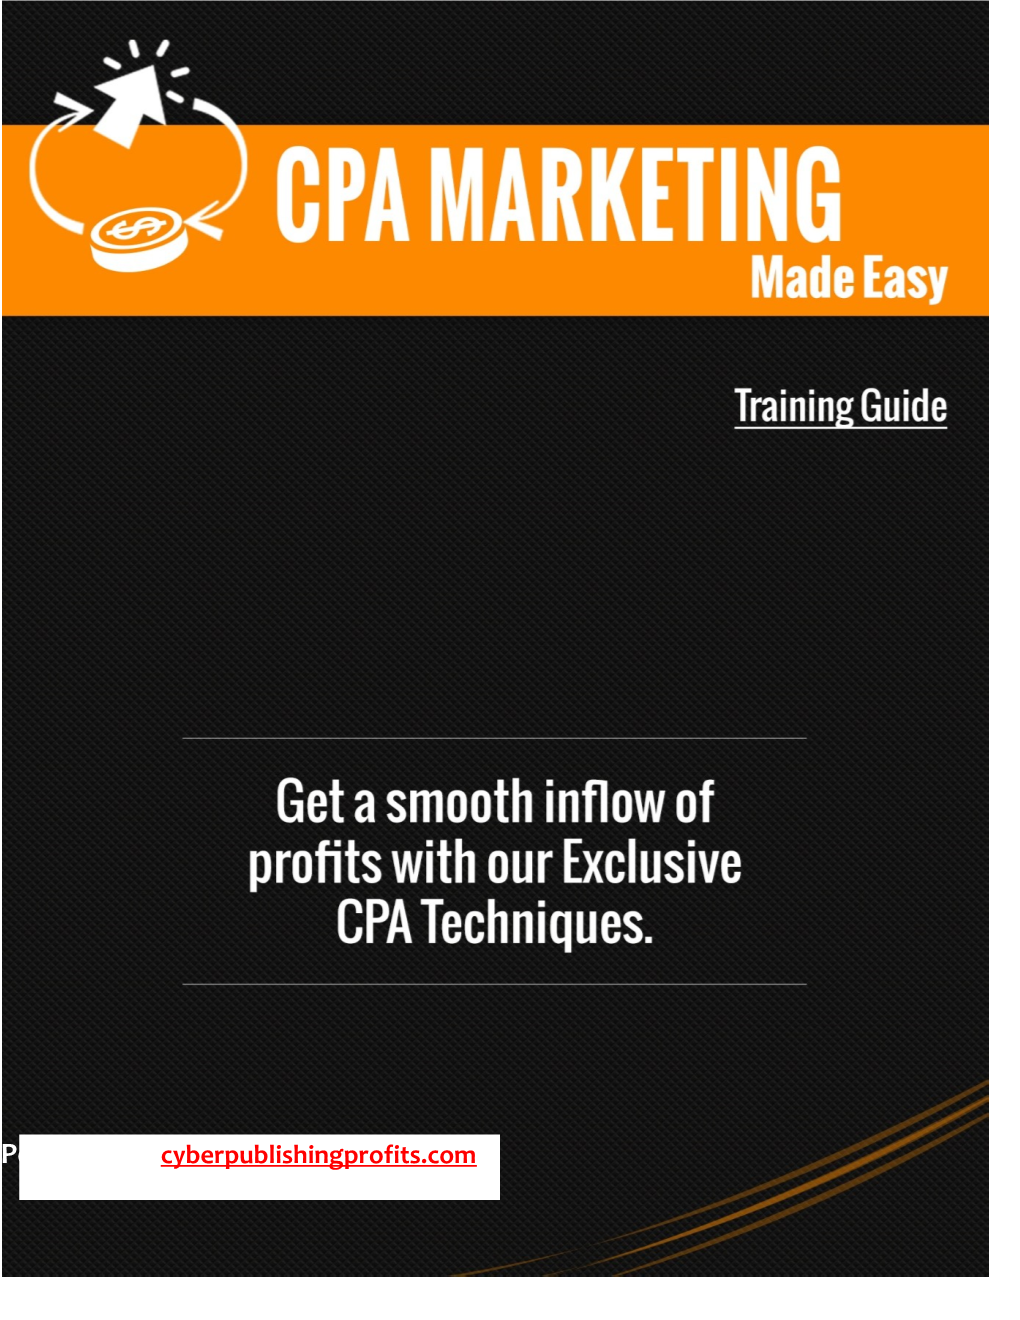 CPA Marketing Resources 63 Limited Special Offer (For the Next 7 Days Only) 64